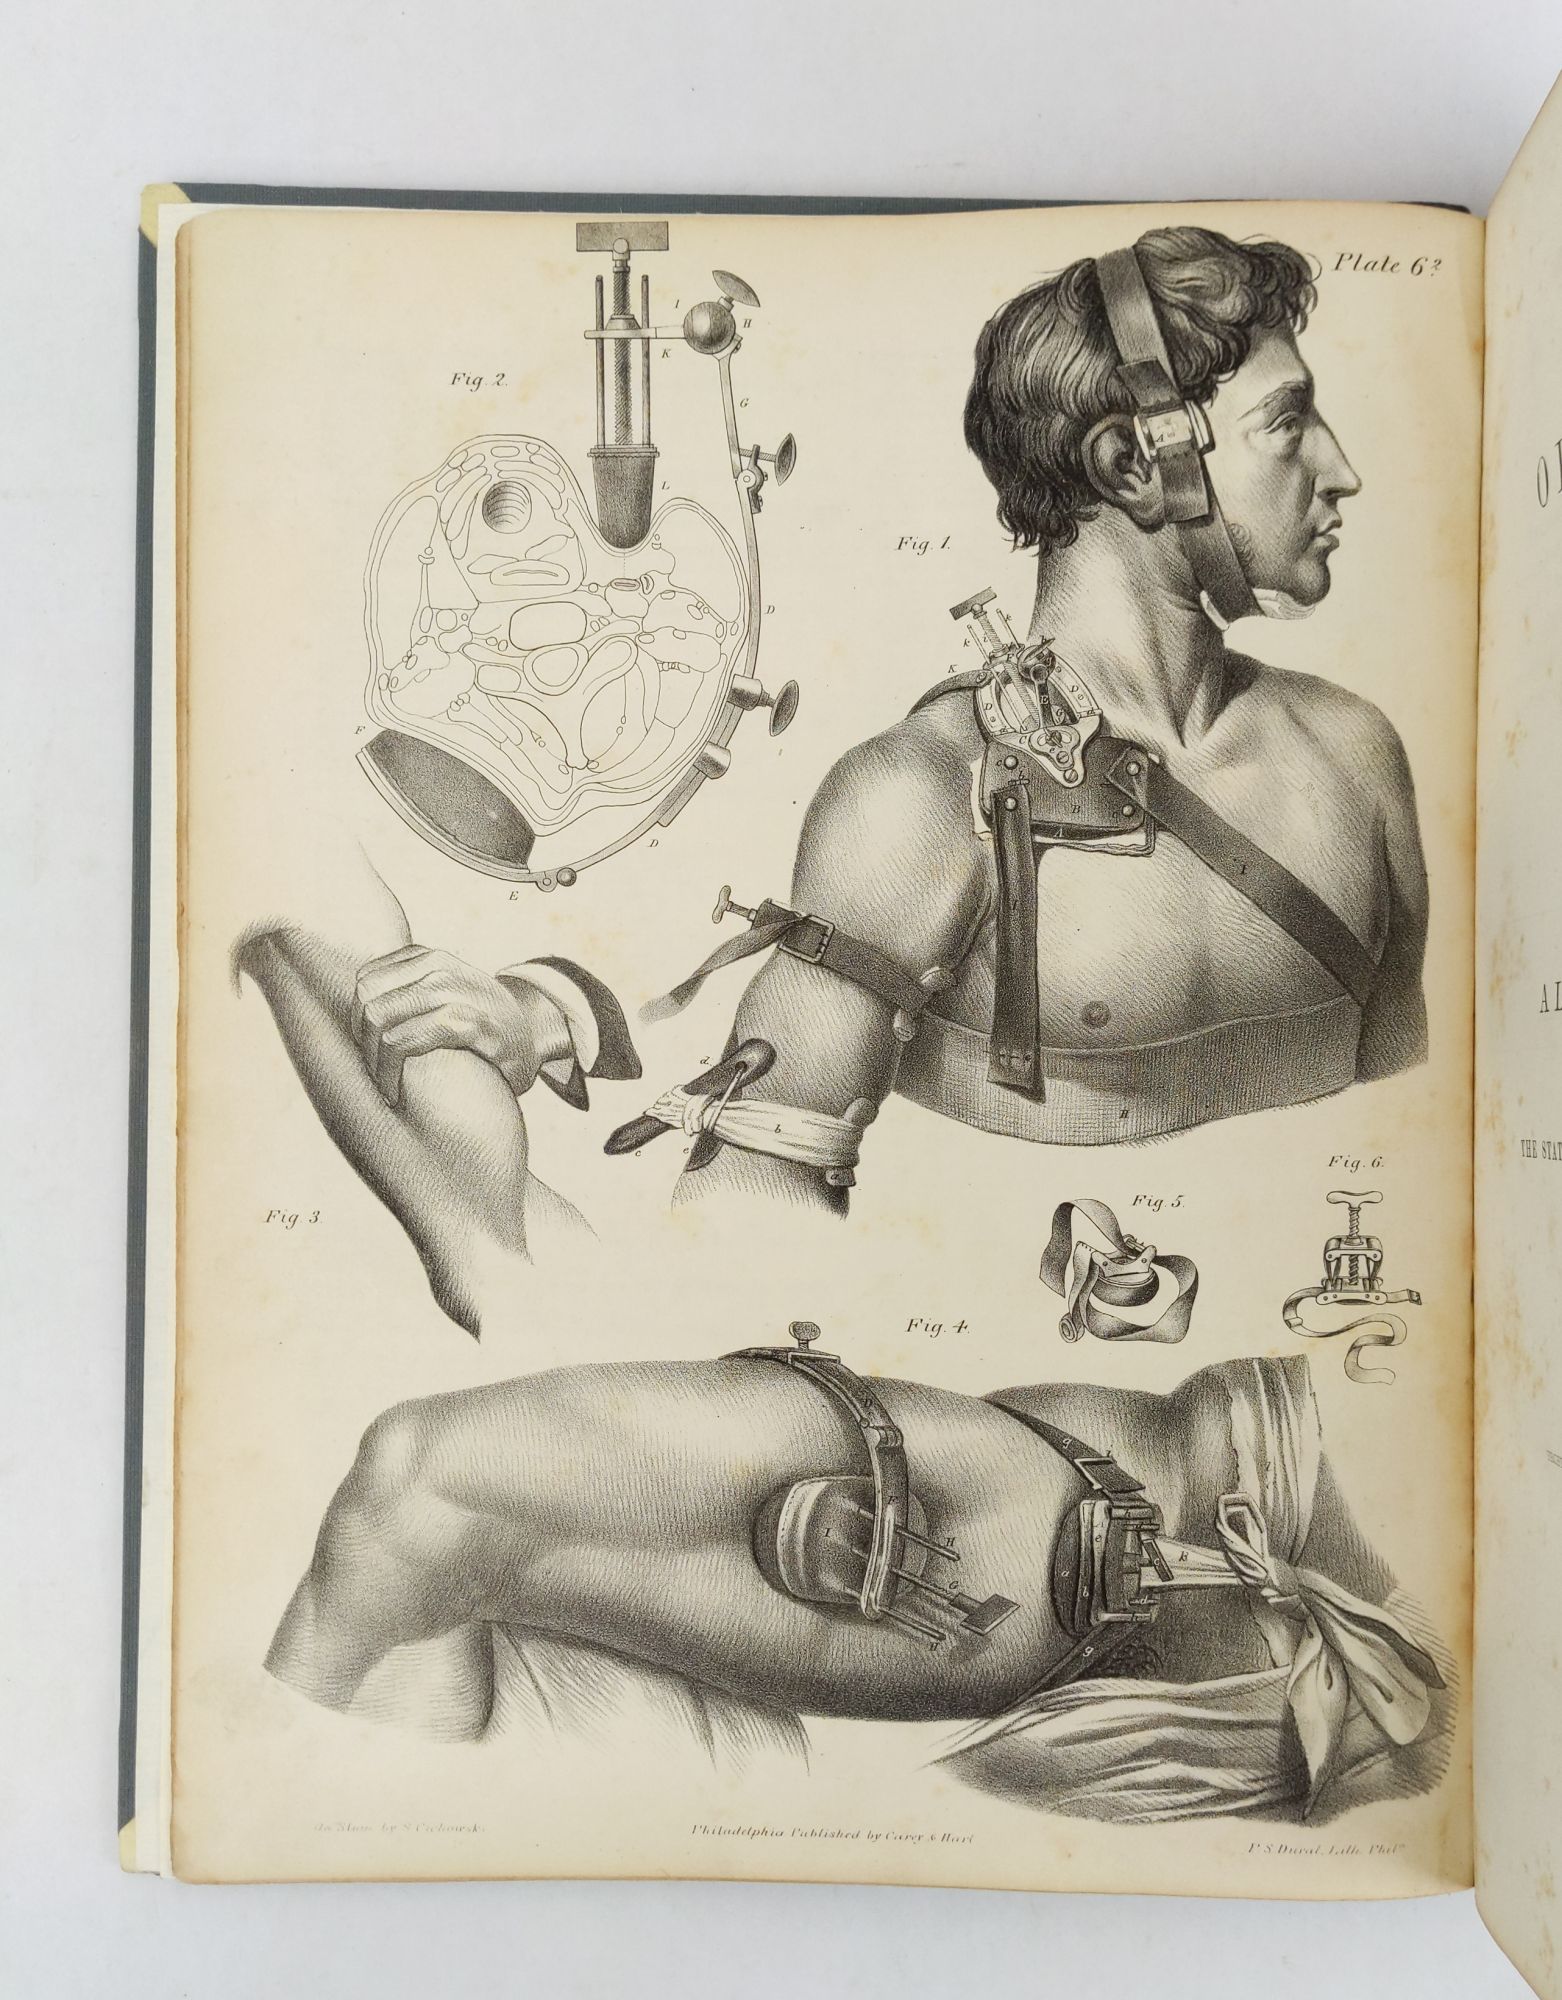 Product Image for A TREATISE ON OPERATIVE SURGERY; COMPRISING A DESCRIPTION OF THE VARIOUS PROCESSES OF THE ART, INCLUDING ALL THE NEW OPERATIONS ; EXHIBITING THE STATE OF SURGICAL SCIENCE IN ITS PRESENT ADVANCED CONDITION: WITH EIGHTY PLATES CONTAINING FOUR HUNDRED AND EI